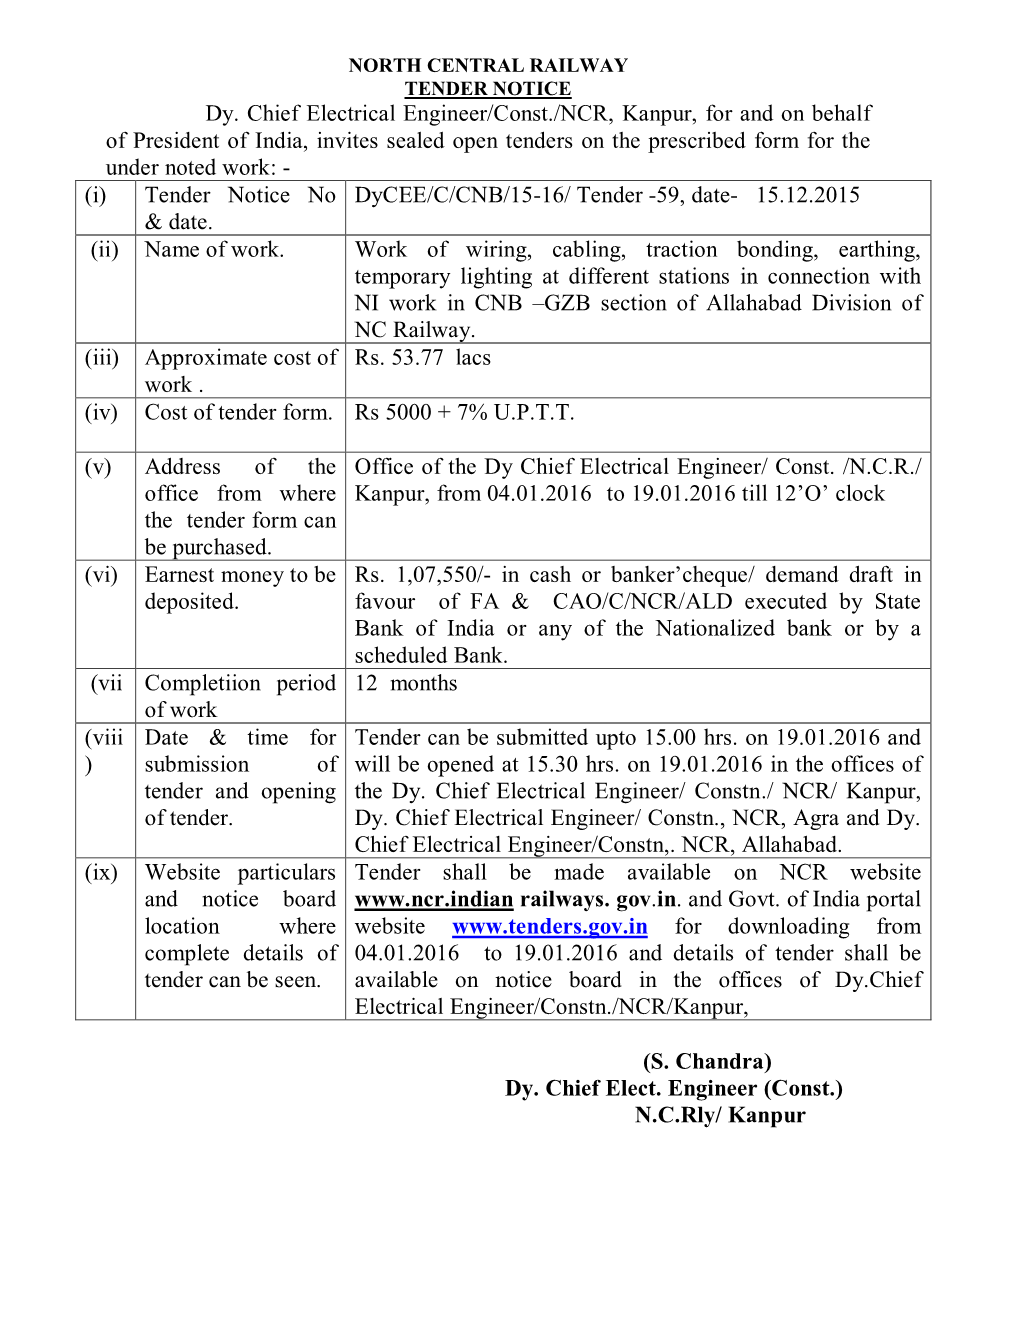 Dy. Chief Electrical Engineer/Const./NCR, Kanpur, For